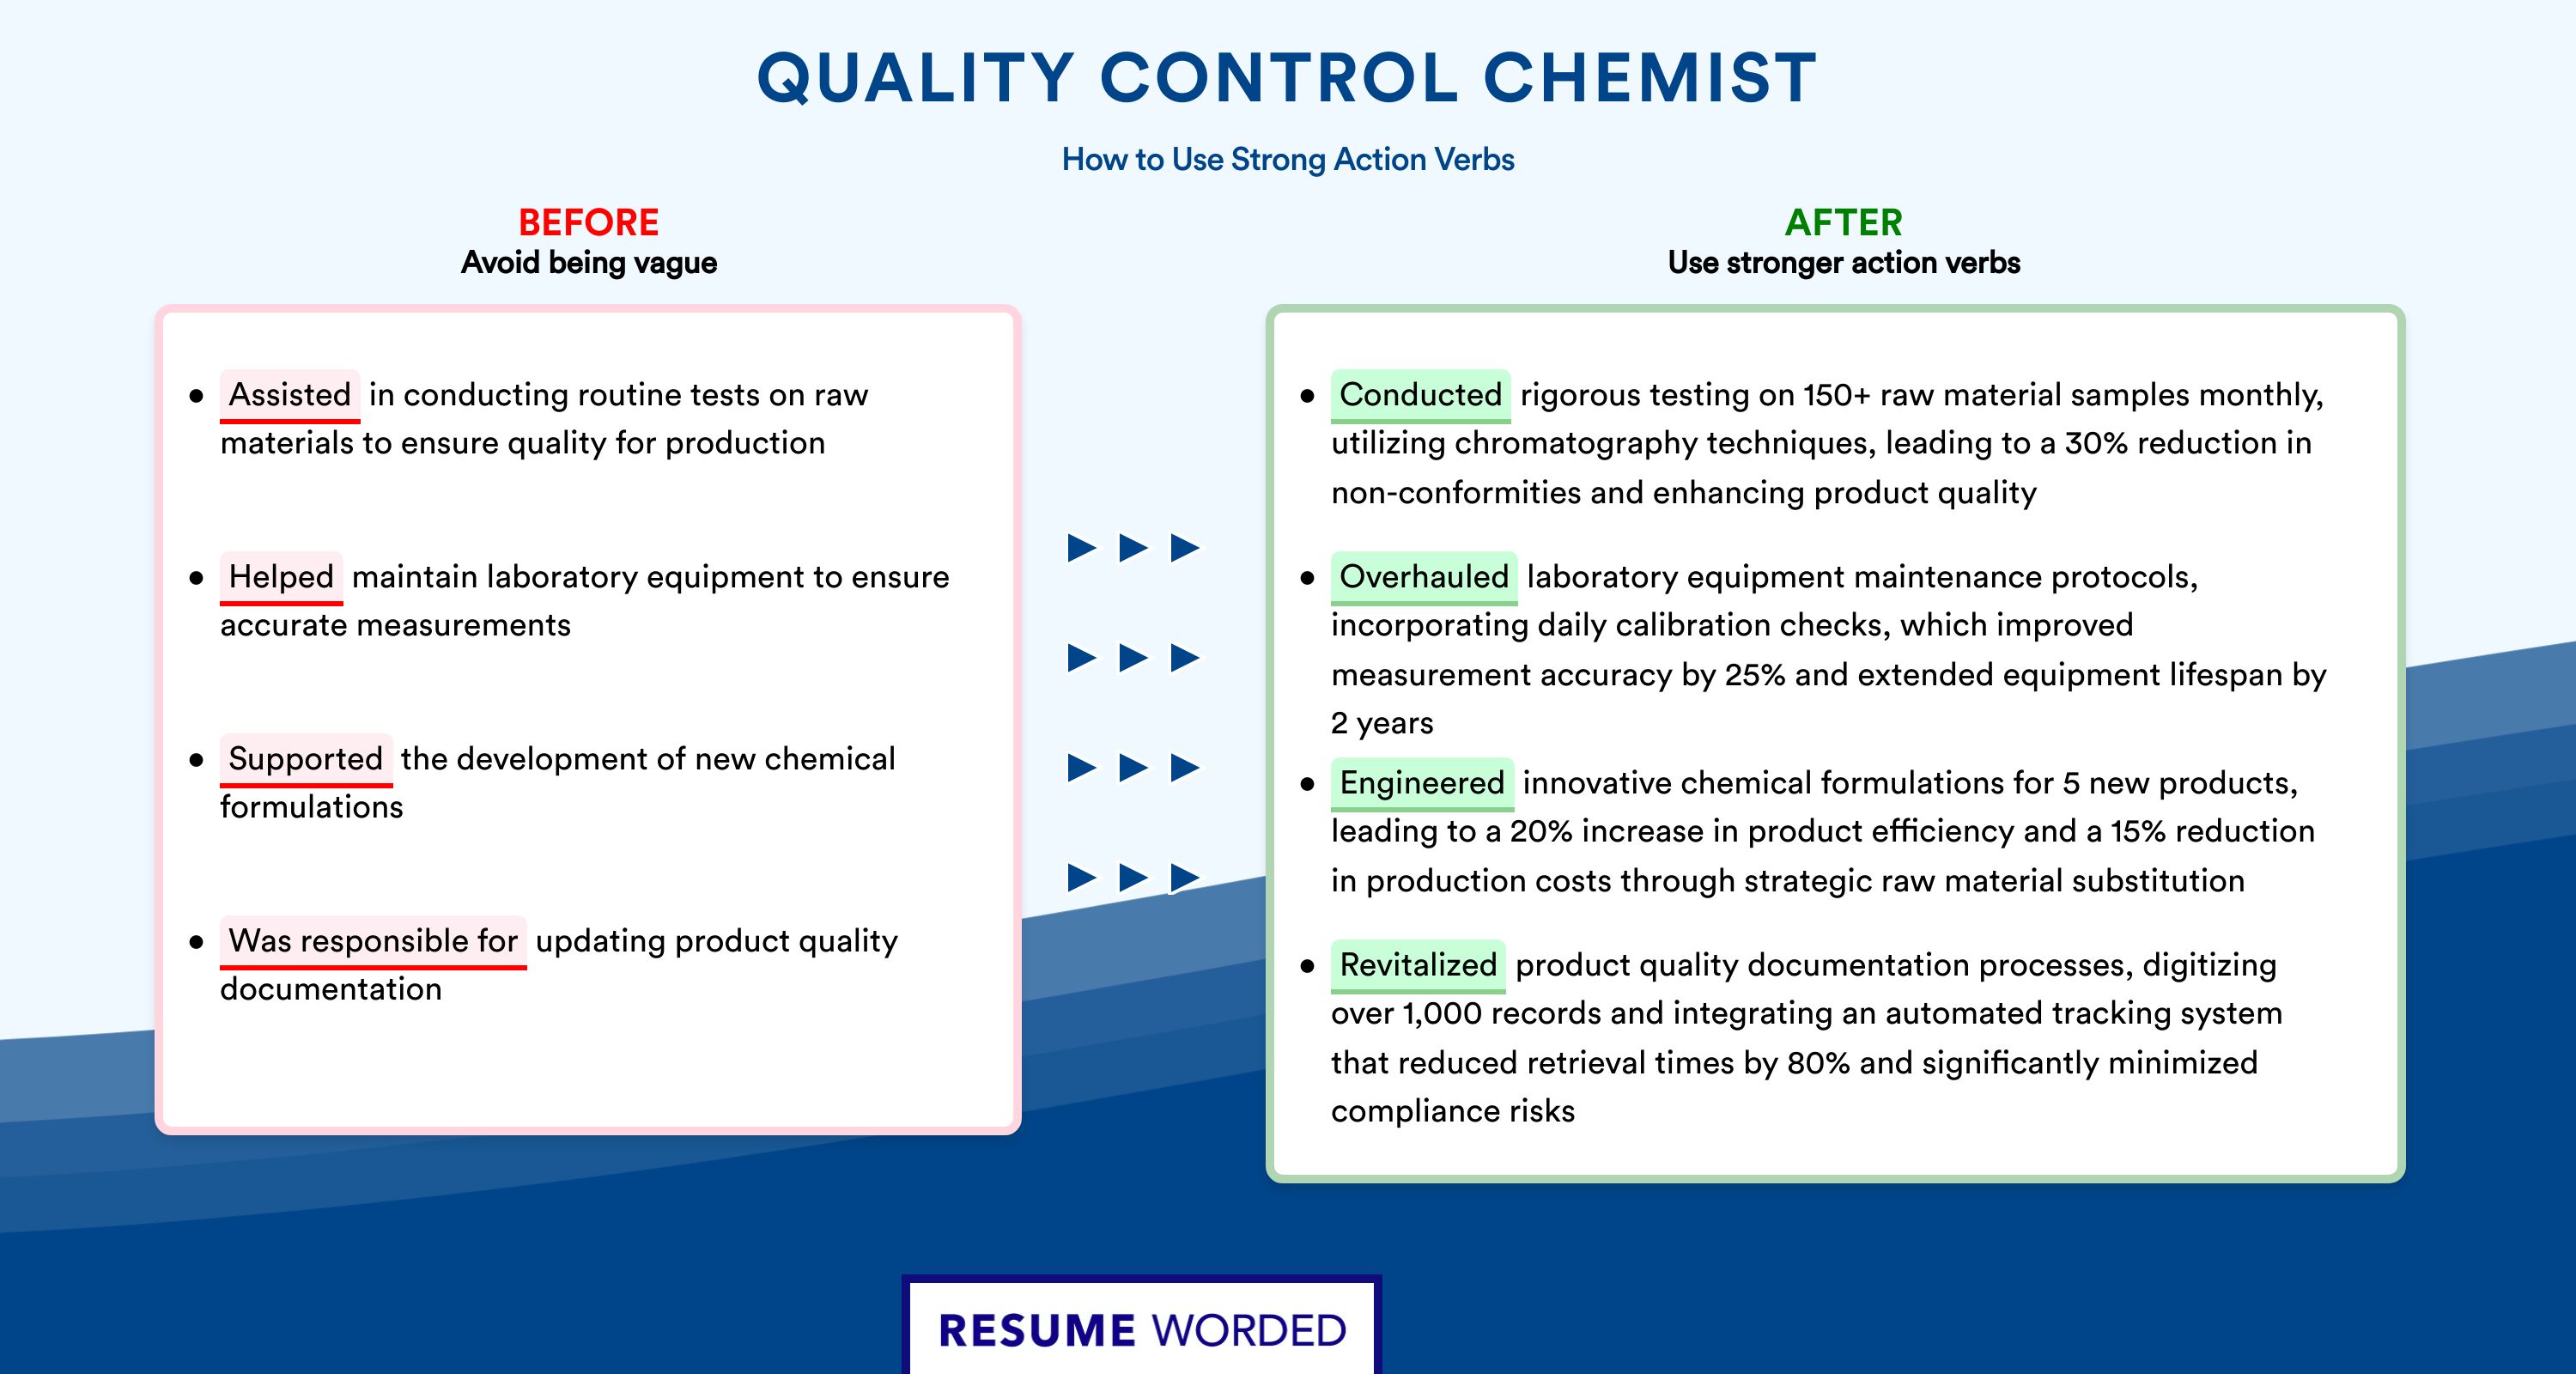 Action Verbs for Quality Control Chemist